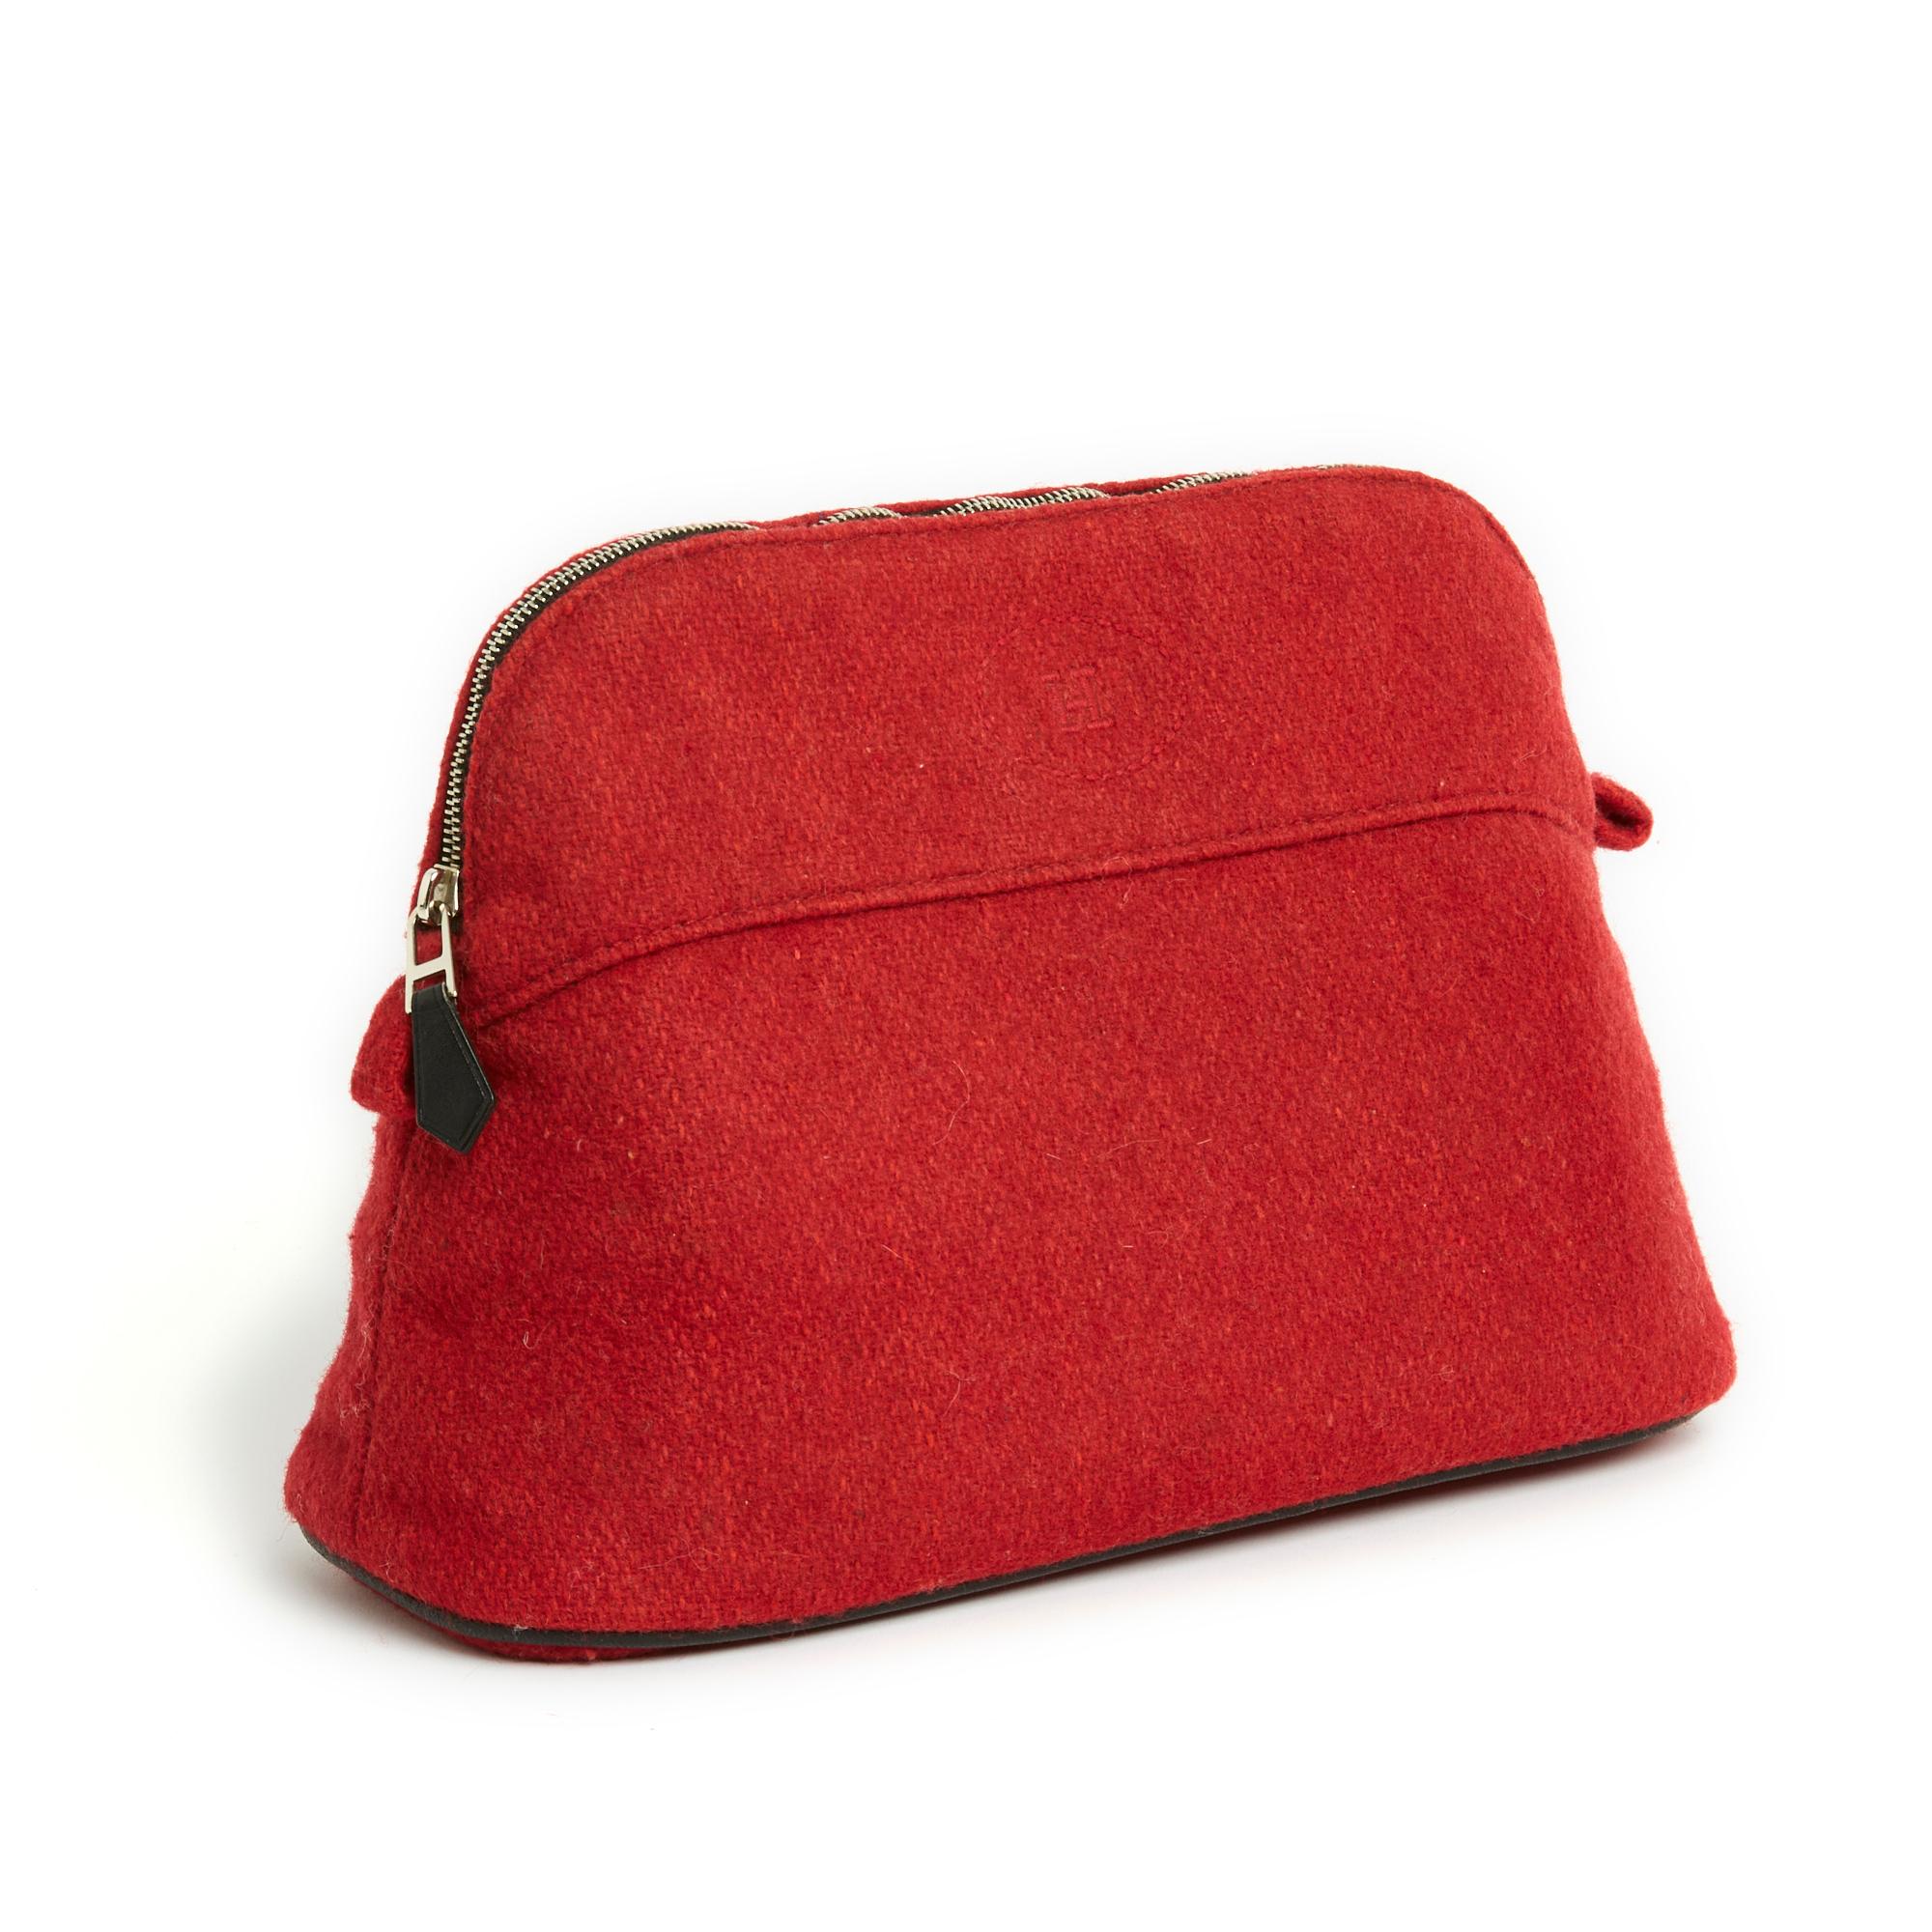 Hermès Pouch Bolide model MM format in red Hermès wool canvas and black leather piping, waterproof lining, closure with a silver metal zip with leather puller, 2 fabric 